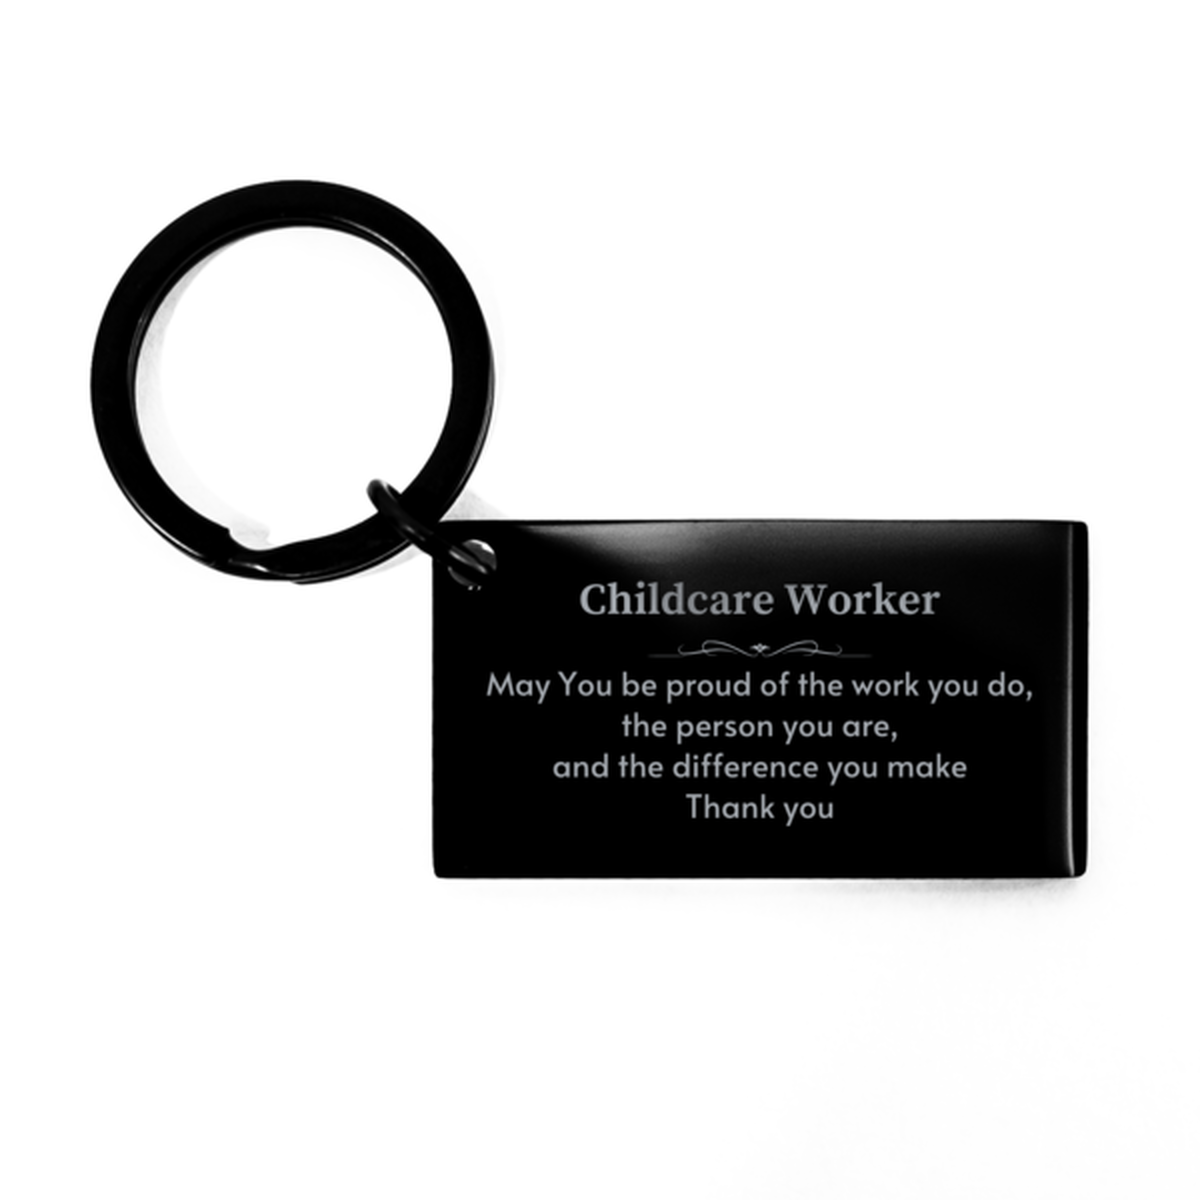 Heartwarming Keychain Retirement Coworkers Gifts for Childcare Worker, Director May You be proud of the work you do, the person you are Gifts for Boss Men Women Friends